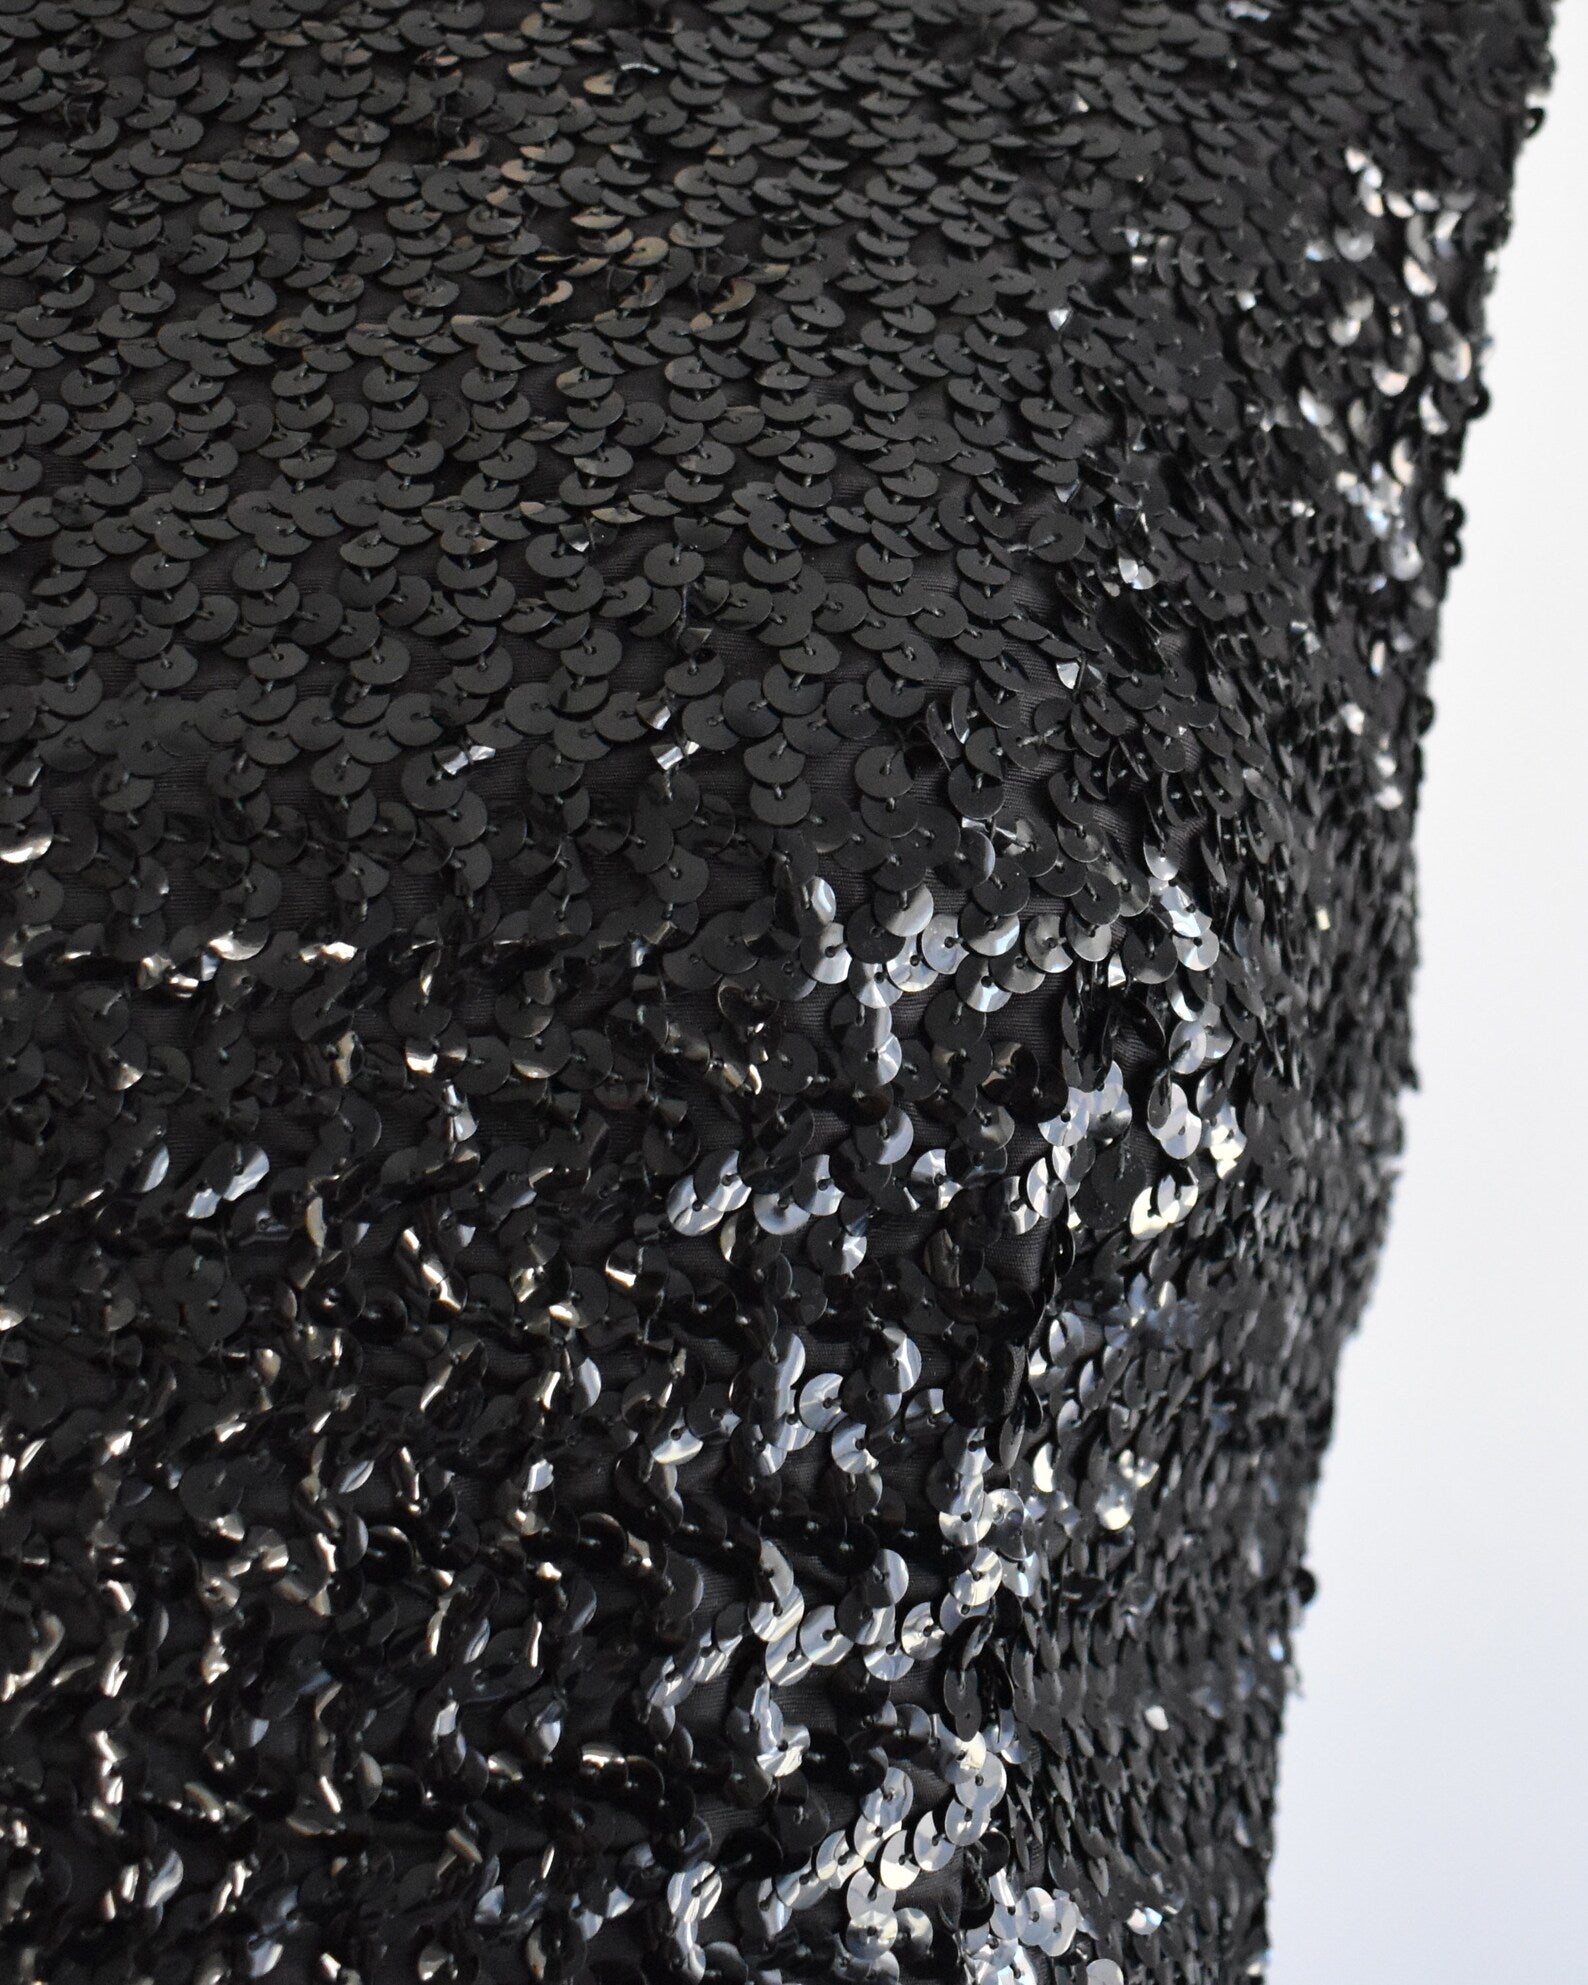 Close up of the black sequins